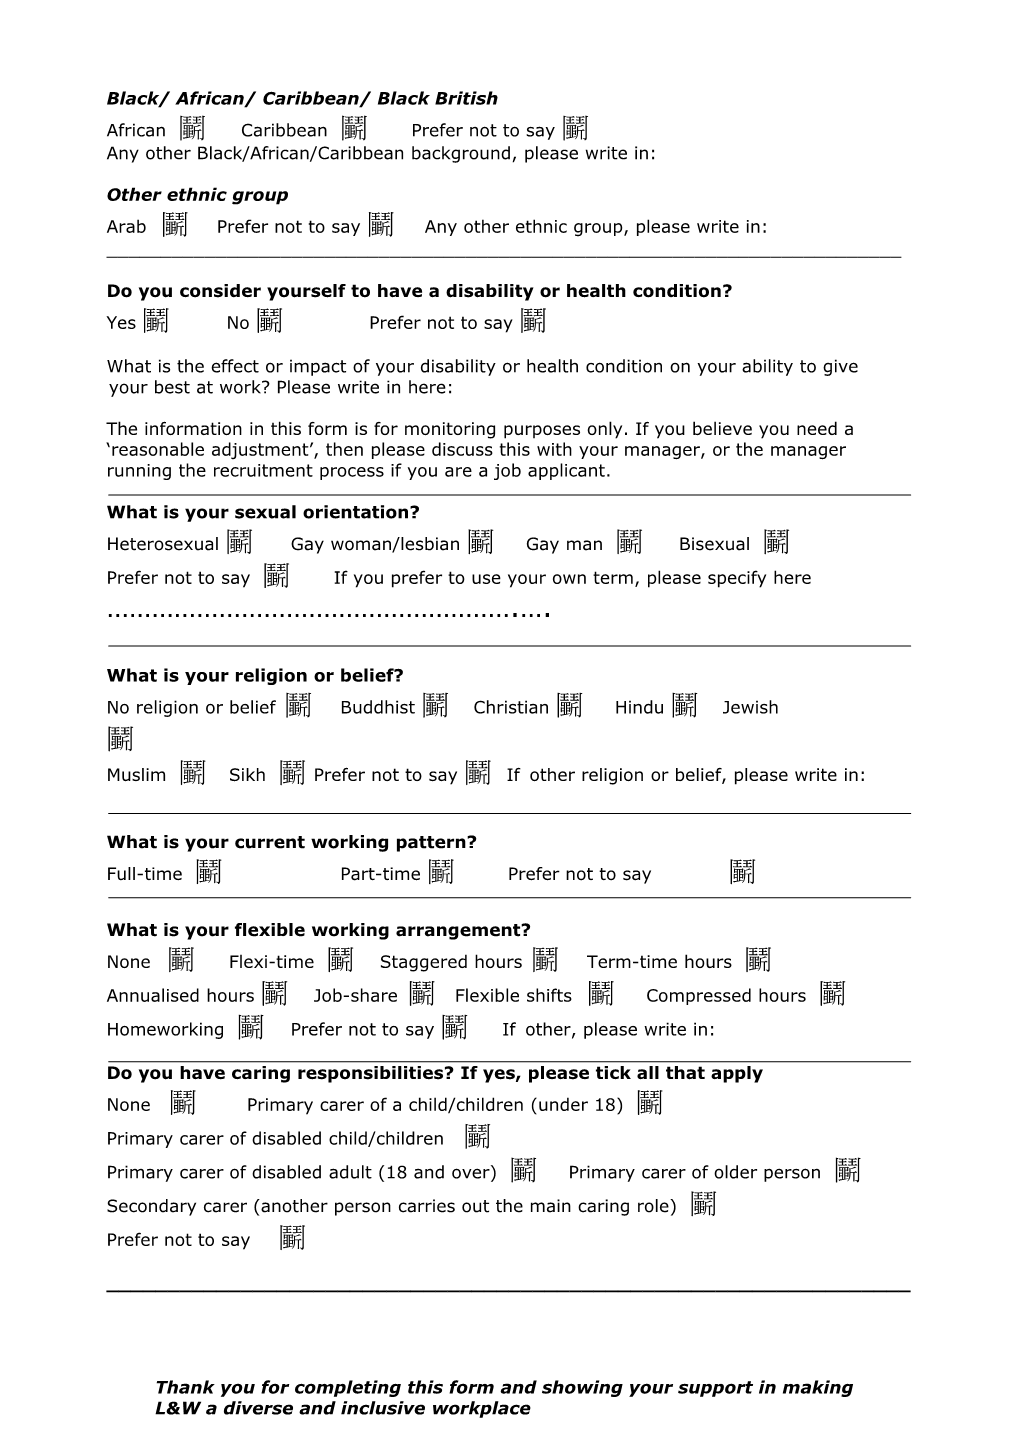 Annex a Sample Equal Opportunities Monitoring Form s3